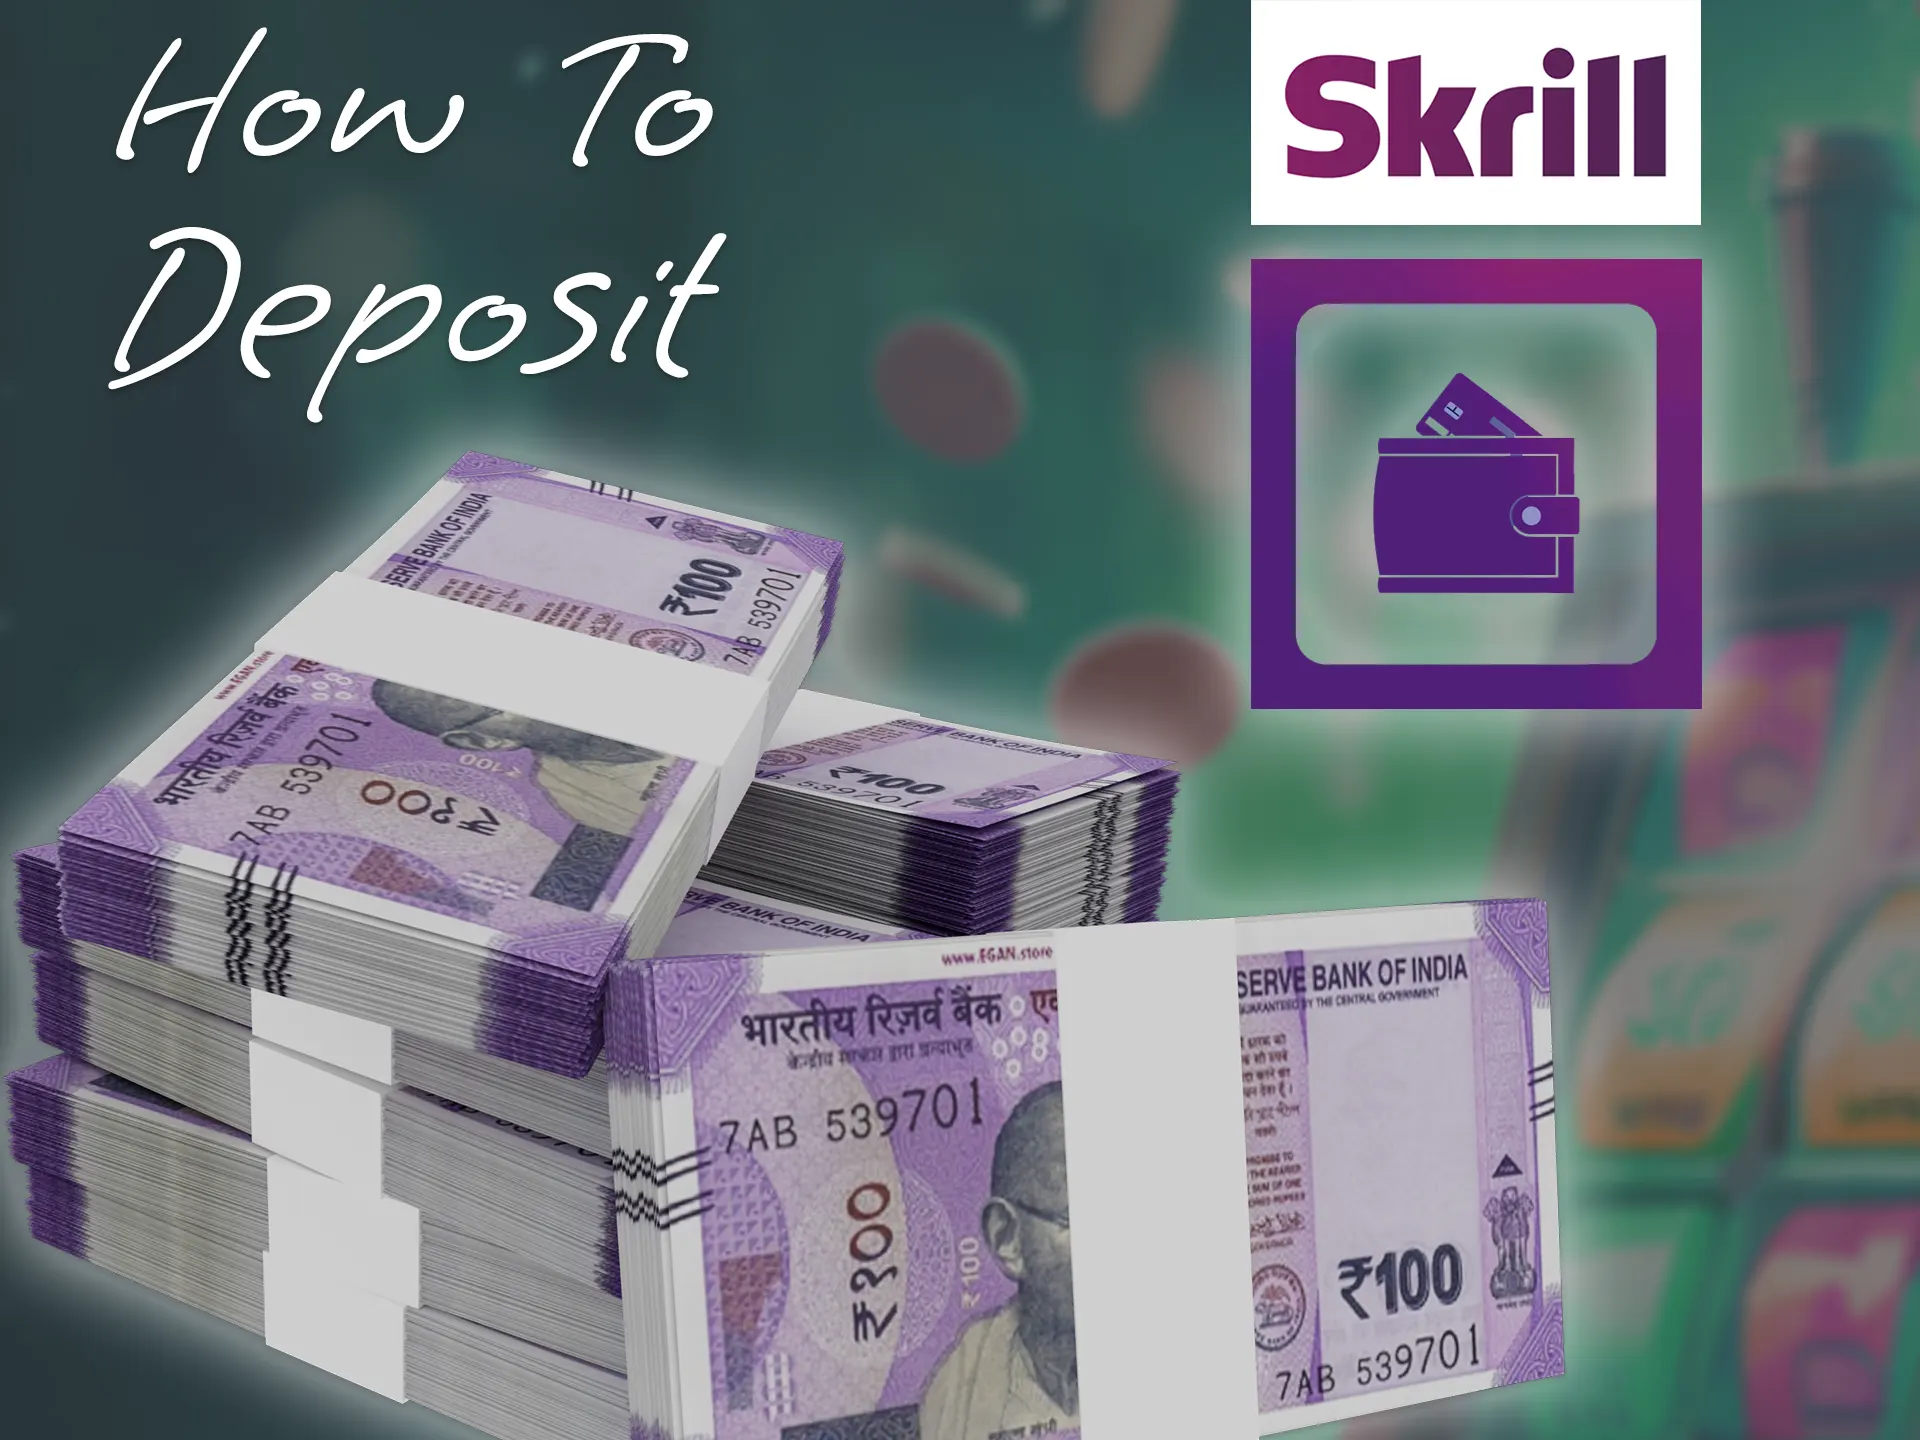 Refill your game account using the Skrill payment system.